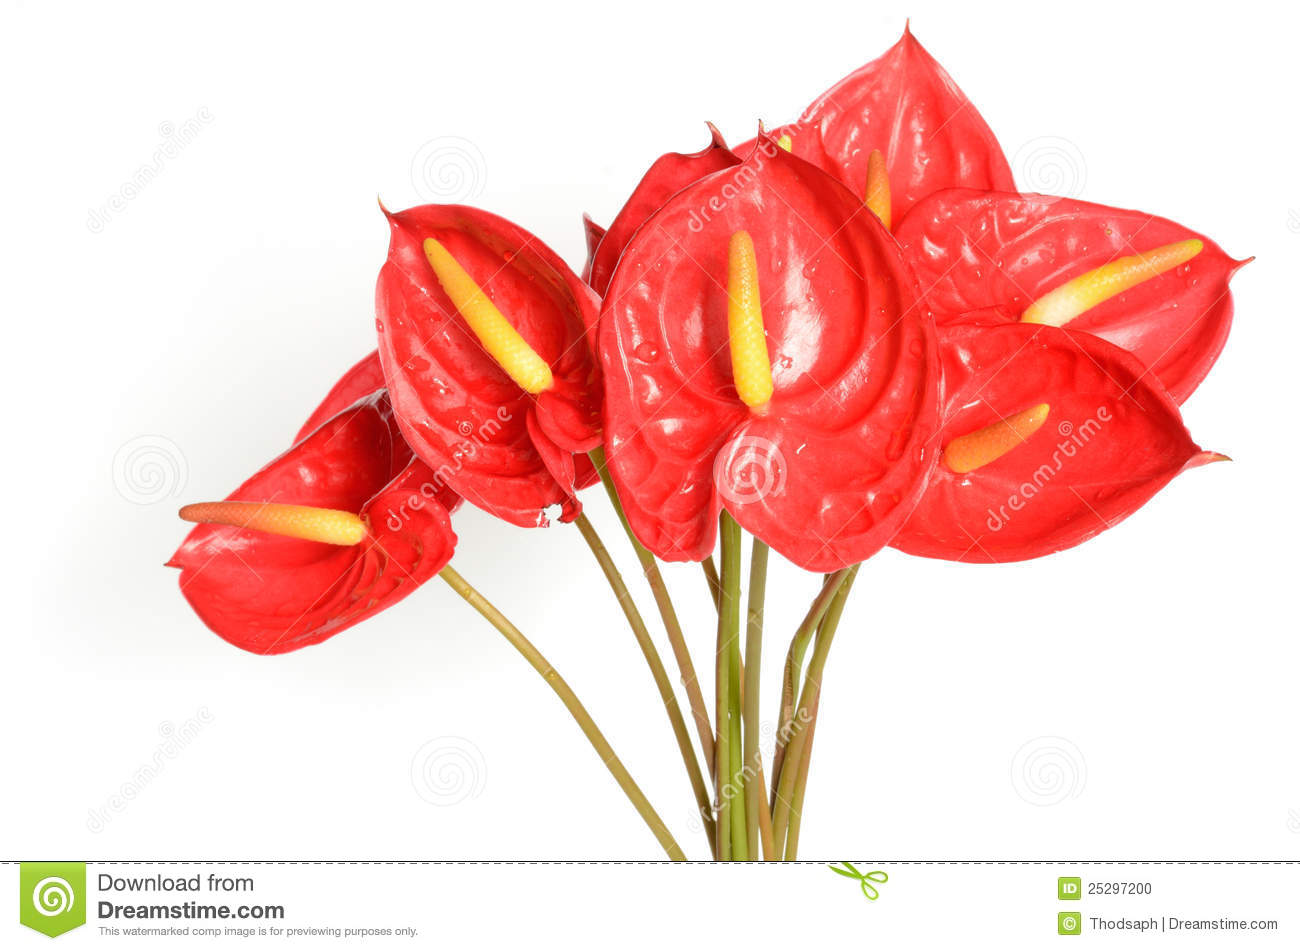 Red Anthurium Flowers Royalty Free Stock Photo.